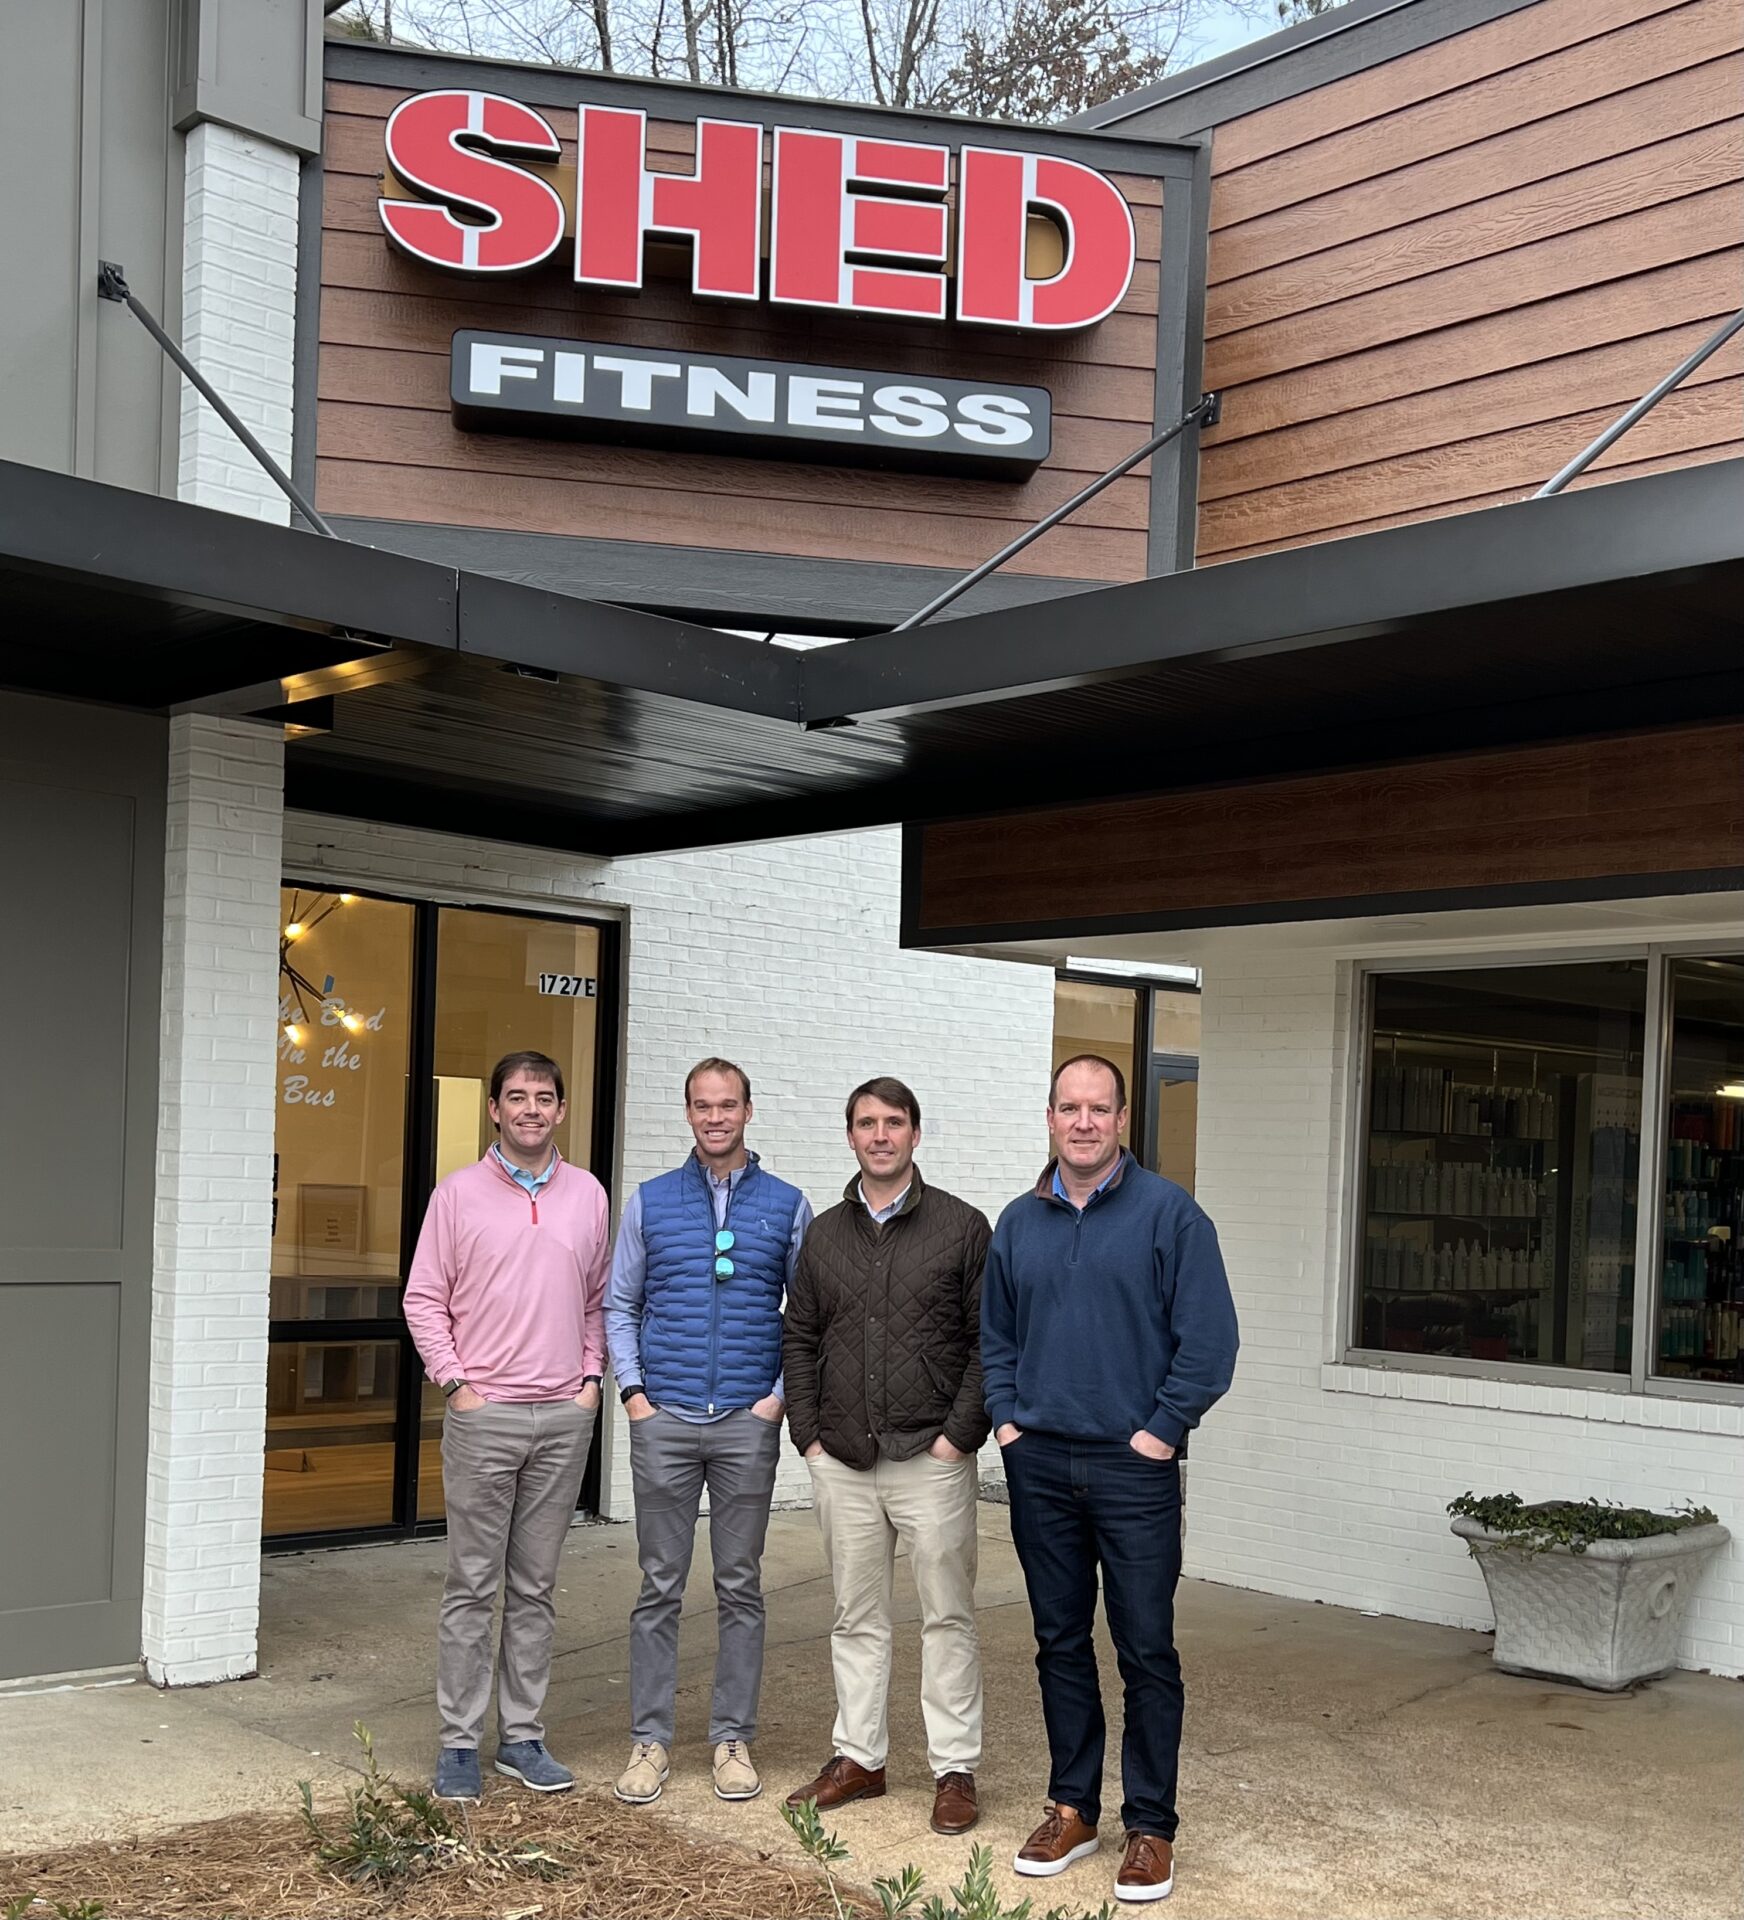 Fitness studio franchise opens new location in West Chester